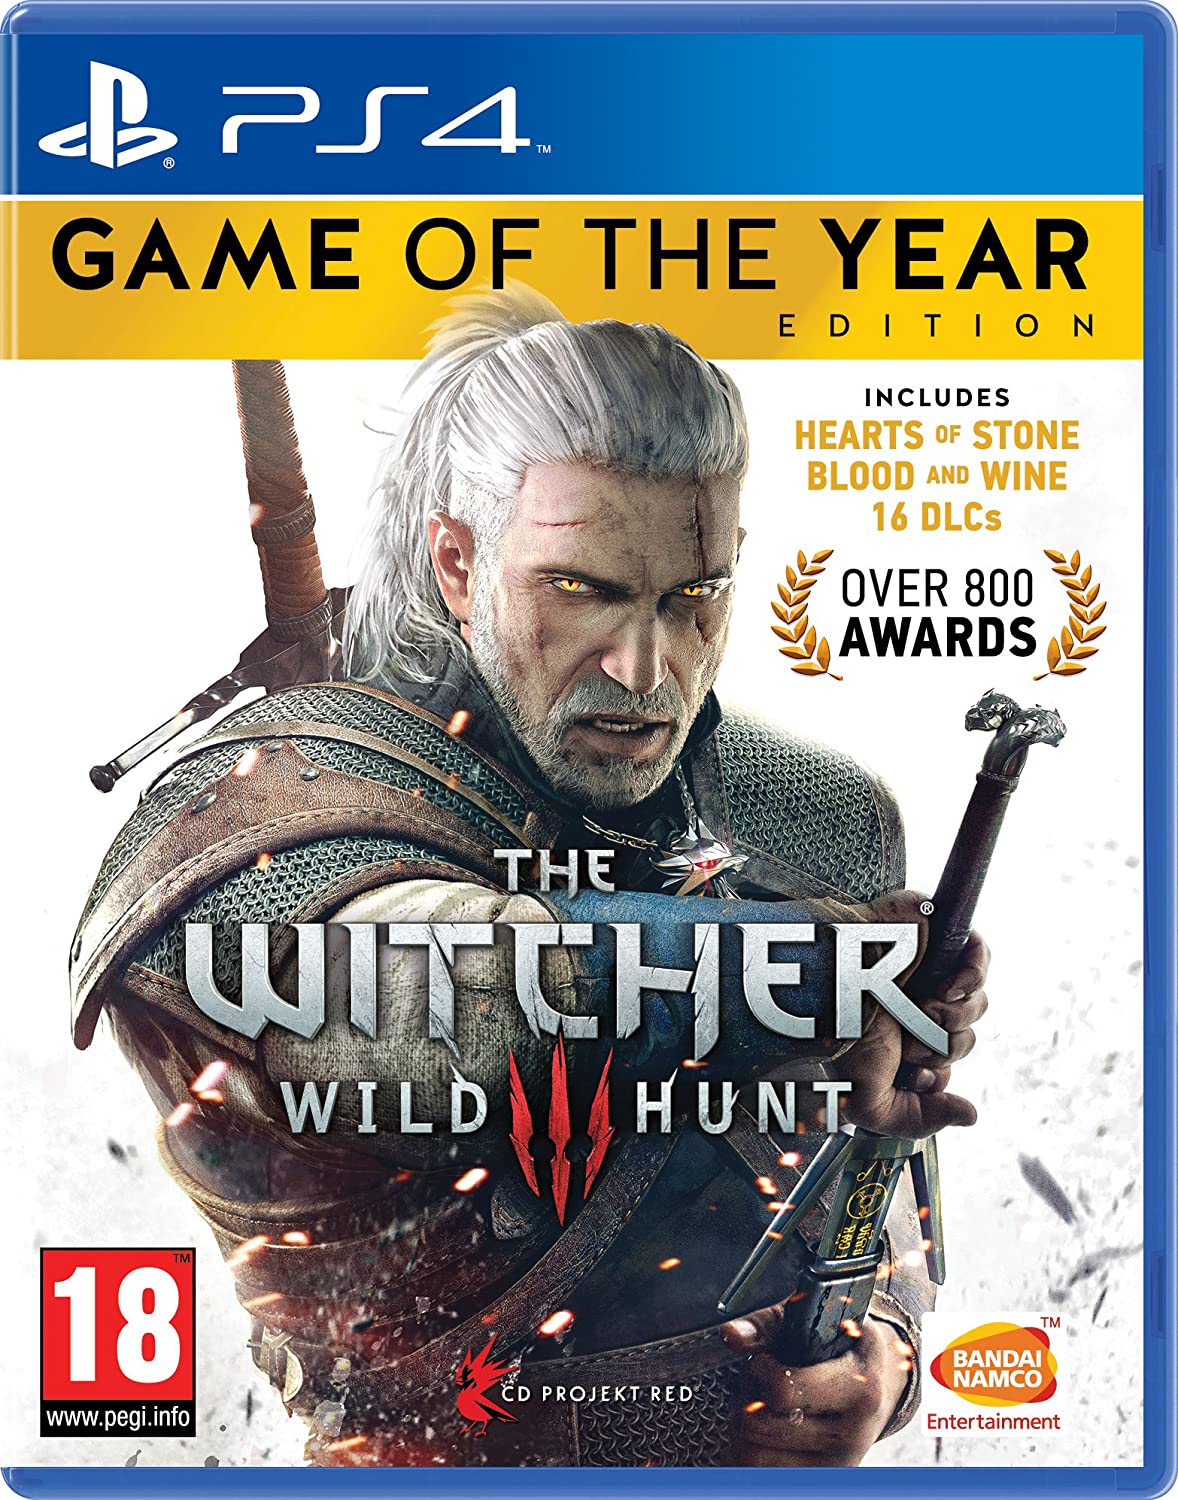 The Witcher 3 巫師3 for PS4 現66折後$17.48，約HK$135，香港門市價HK$198